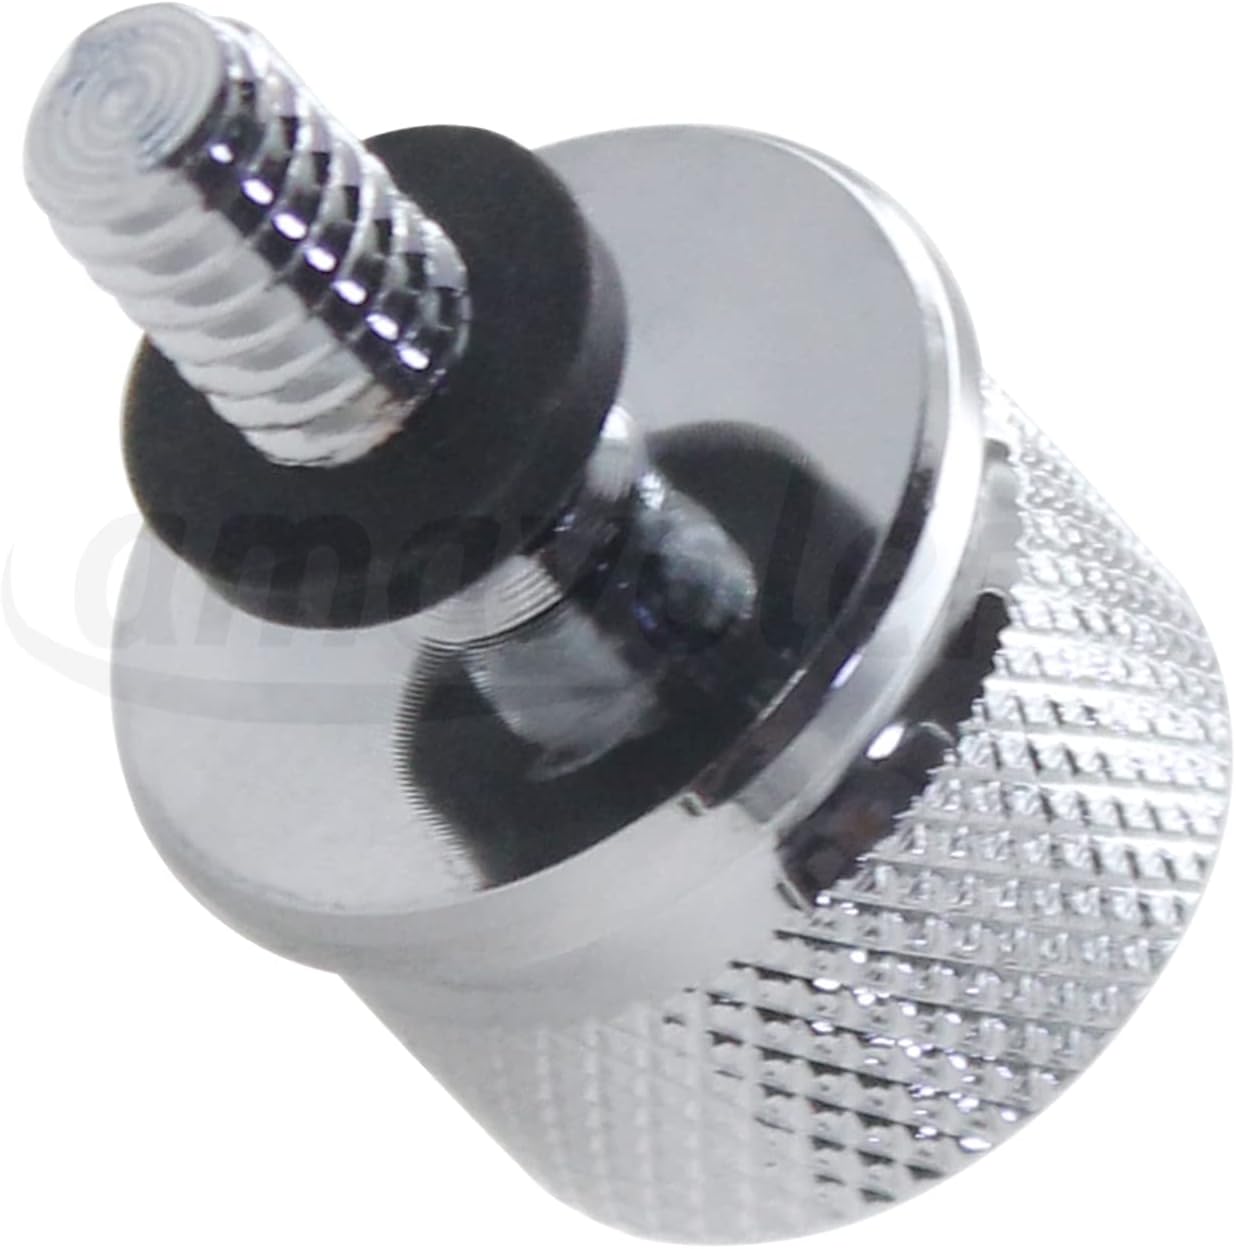 Amavoler Seat Screw Quick Mount Bolt Compatible with Harley Davision Street Glide Electra Glide Ultra Limited 1996-2021 (chrome) - Amavoler Seat Screw Quick Mount Bolt Review